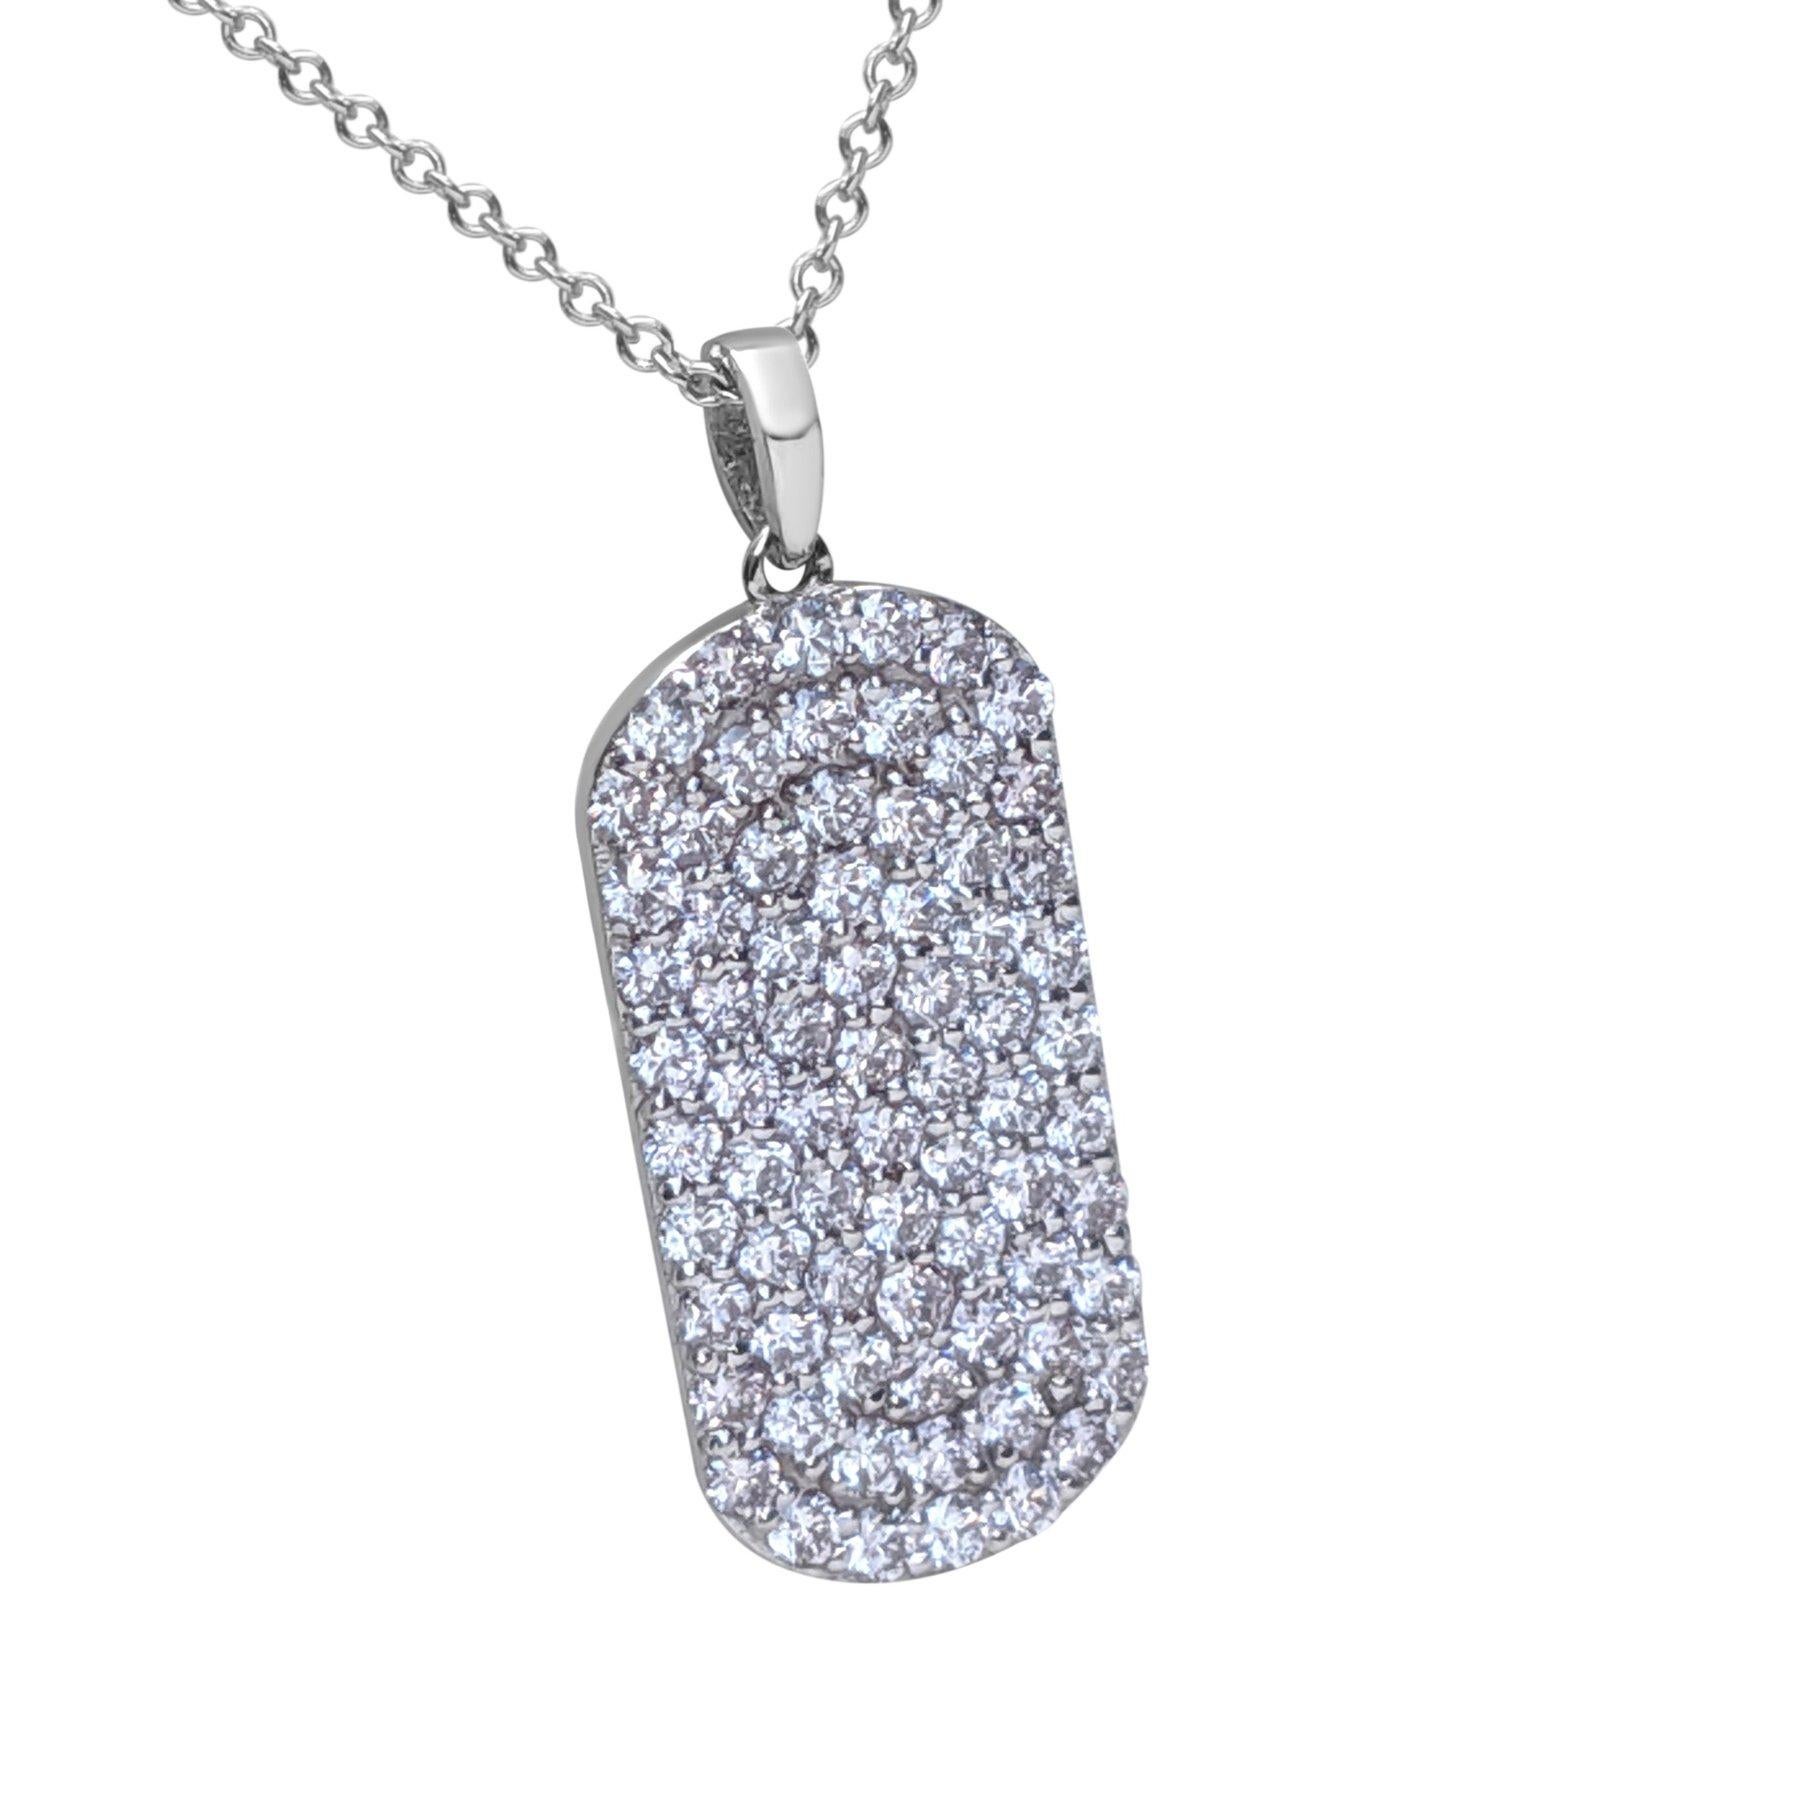 NO RESERVE! 1.10 Ct Fancy Pink Diamond 14 kt. White Gold Pendant Necklace For Sale 1